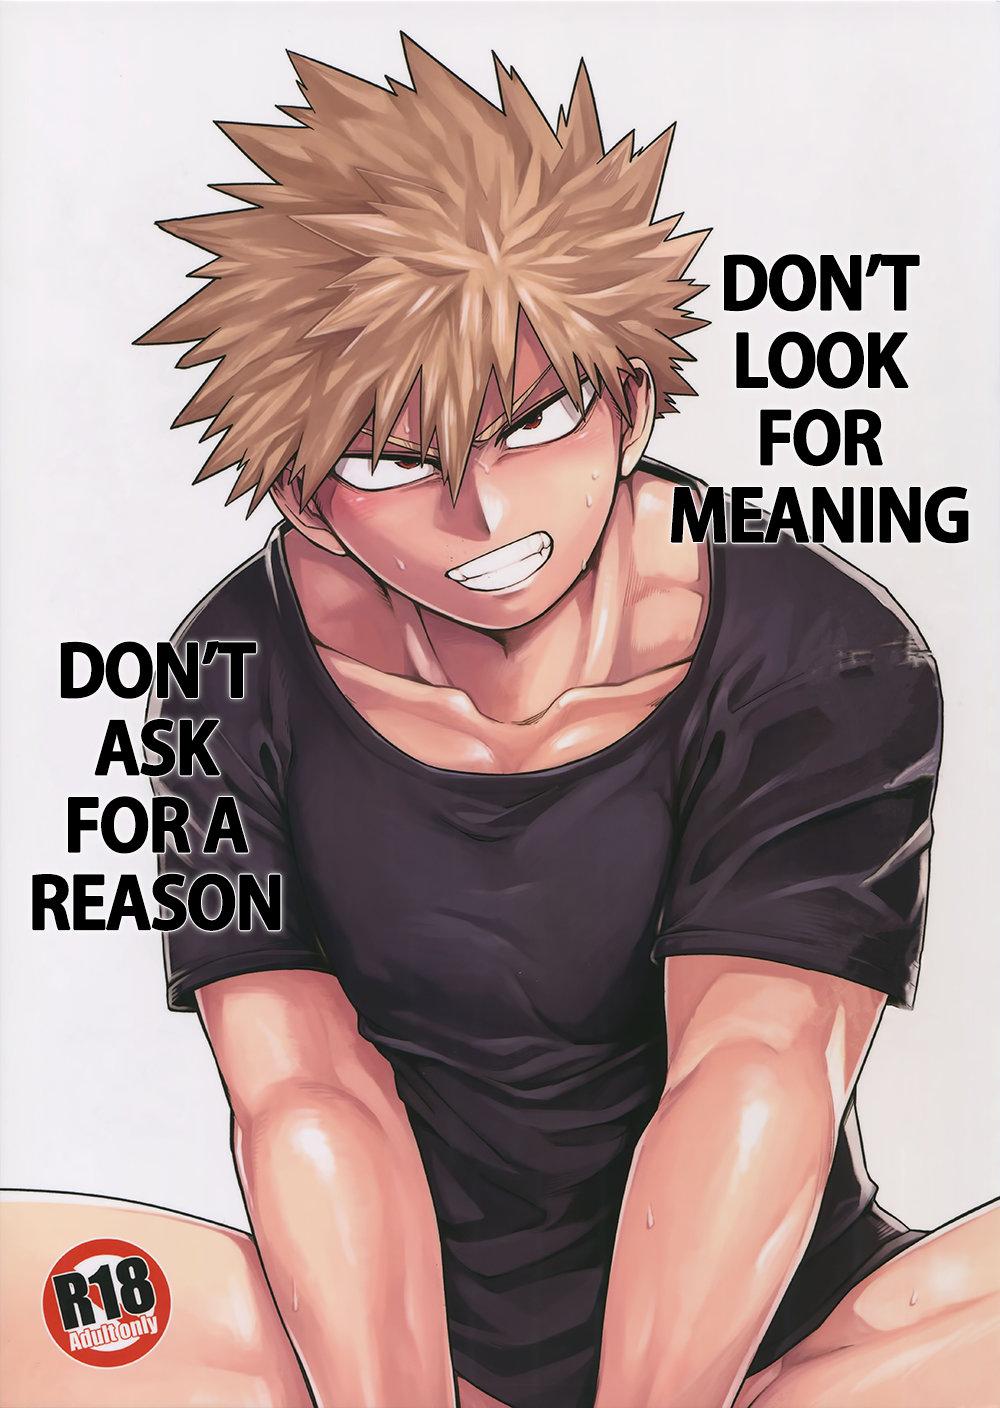 Jeans Imi o Sasuna Riyuu o Touna | Don't Look for Meaning, Don't Ask for a Reason - My hero academia Cougar - Page 1